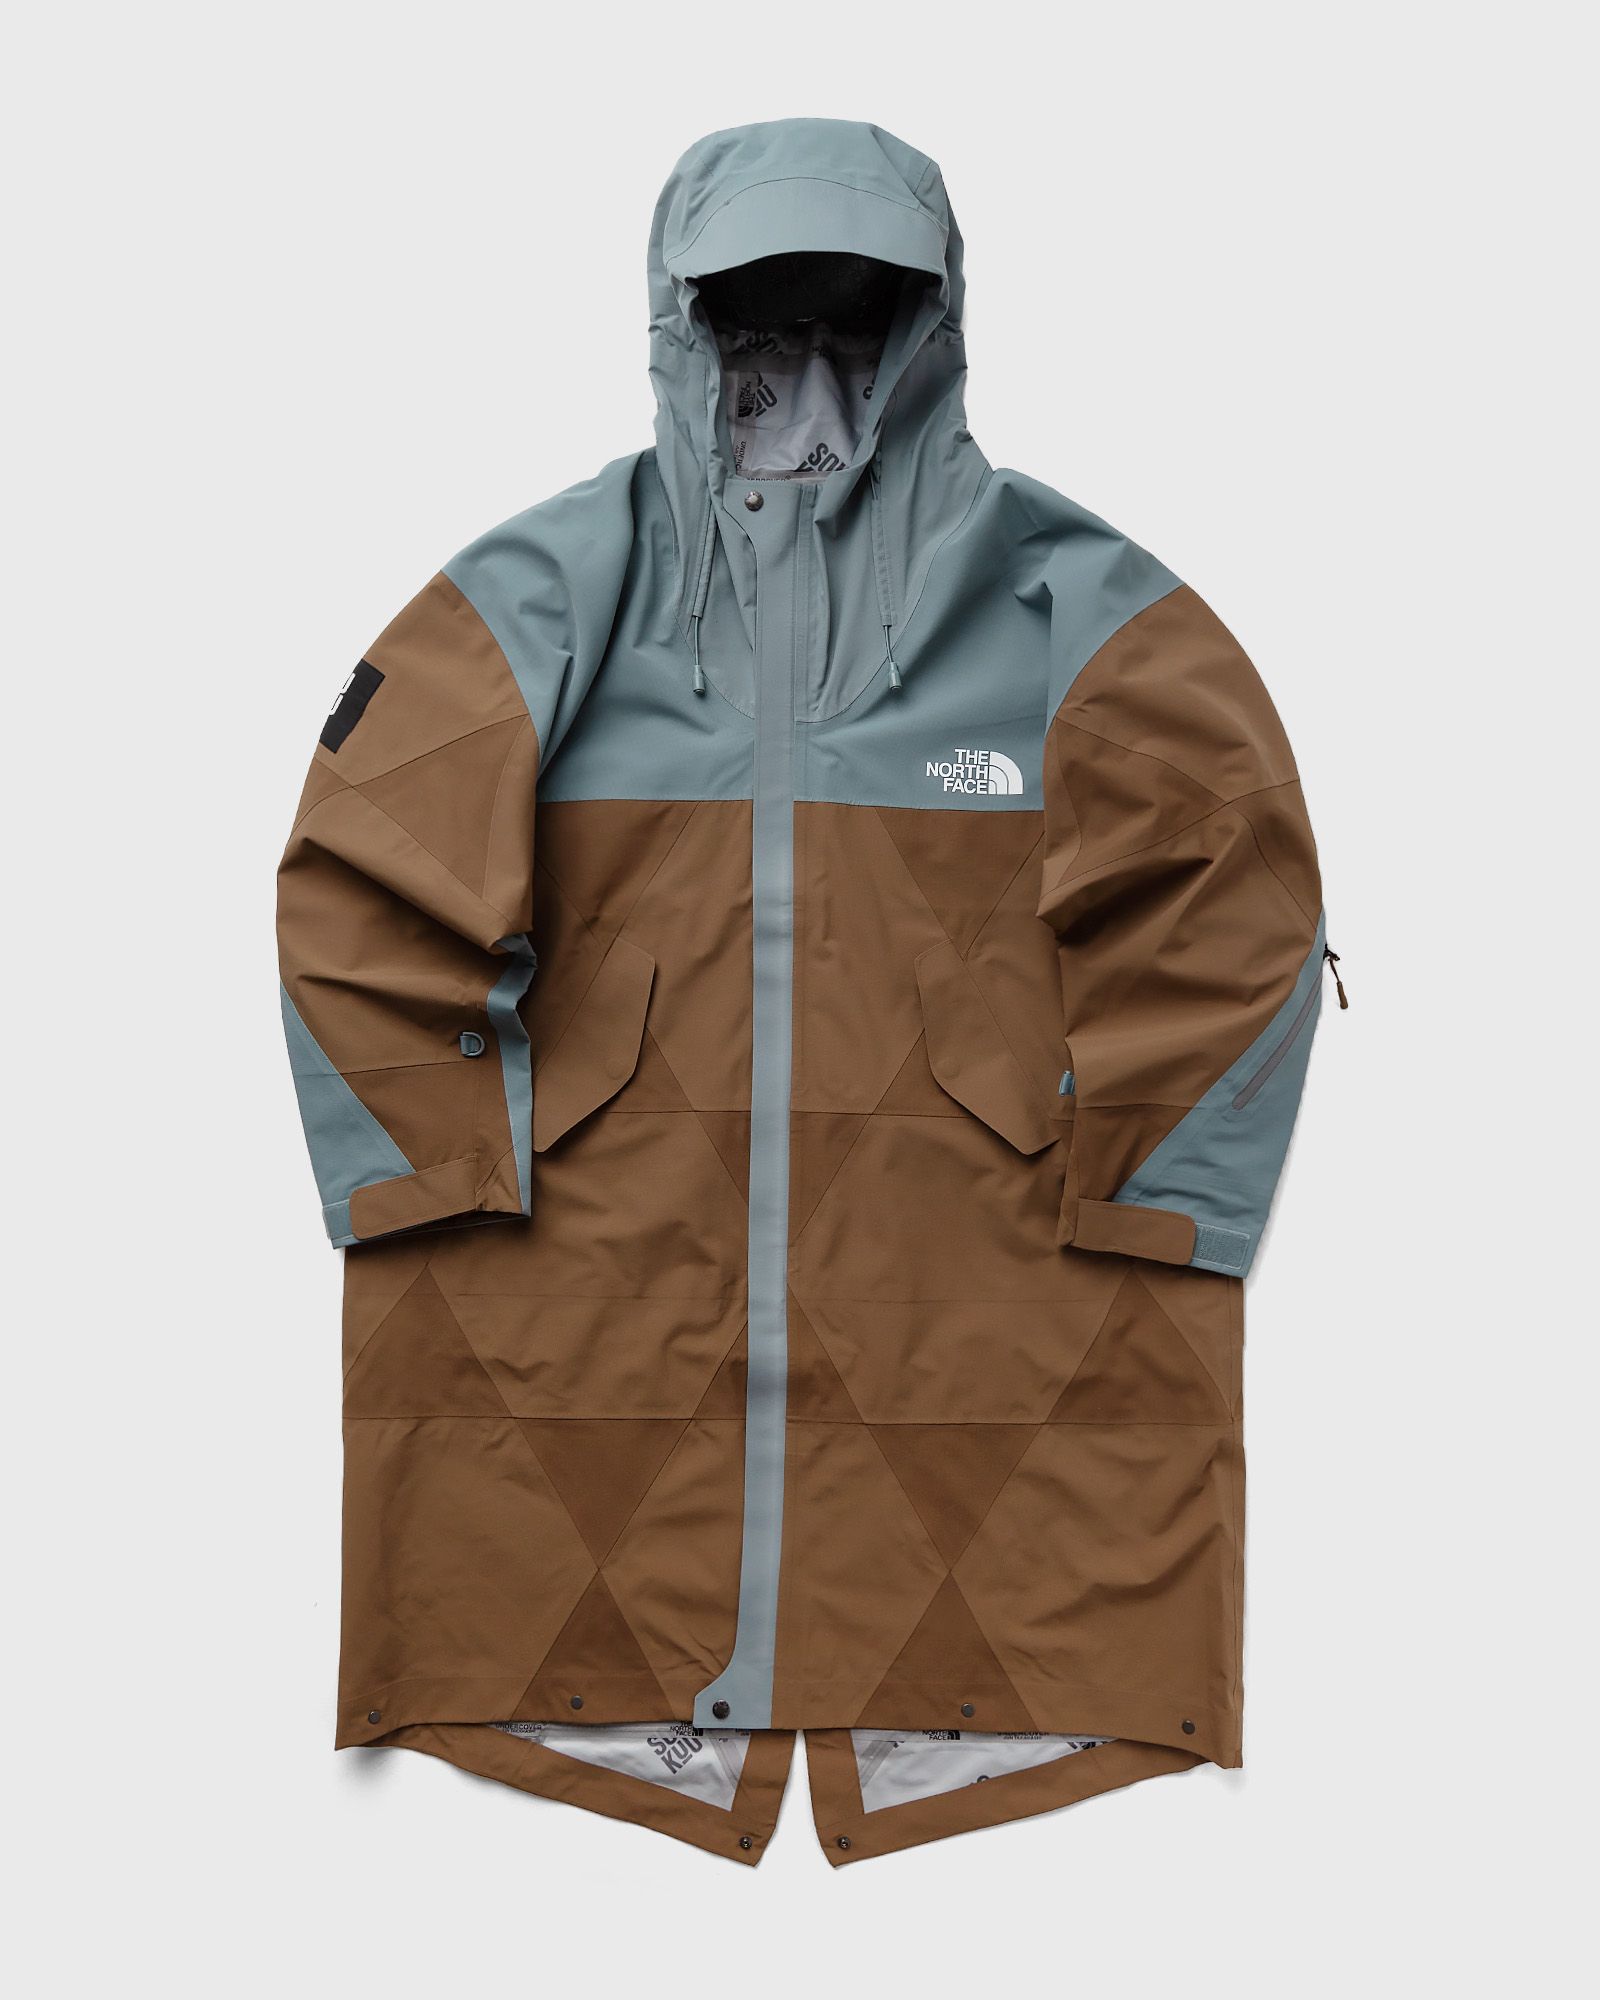 The North Face - x undercover geodesic shell jacket men shell jackets blue|brown in größe:l